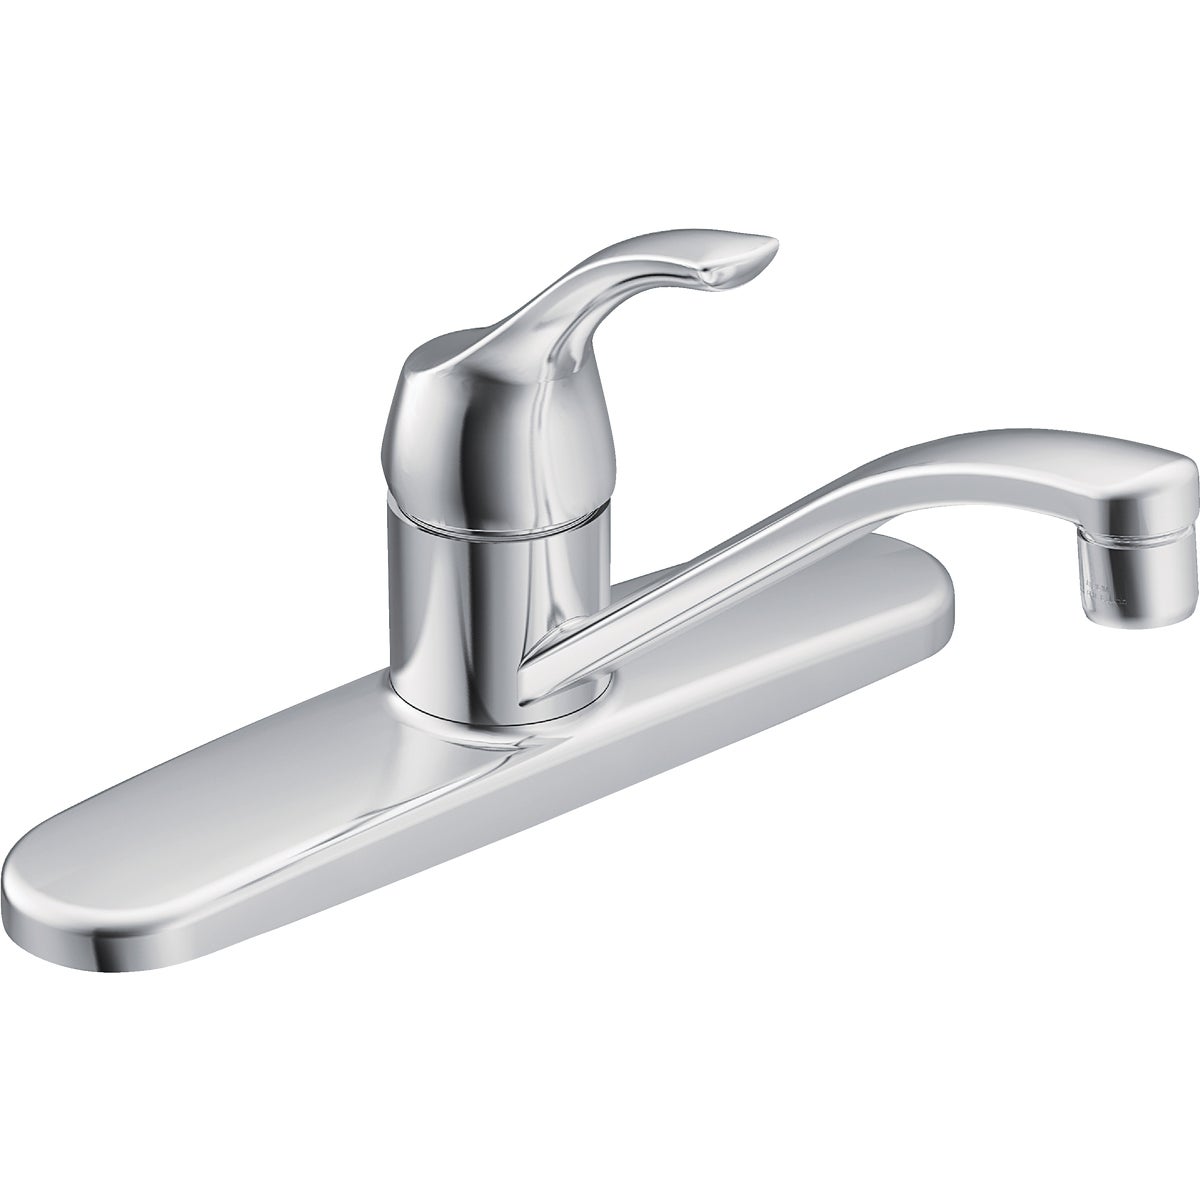 Item 419400, Adler single handle faucet with lever handle and 9 In. spout.